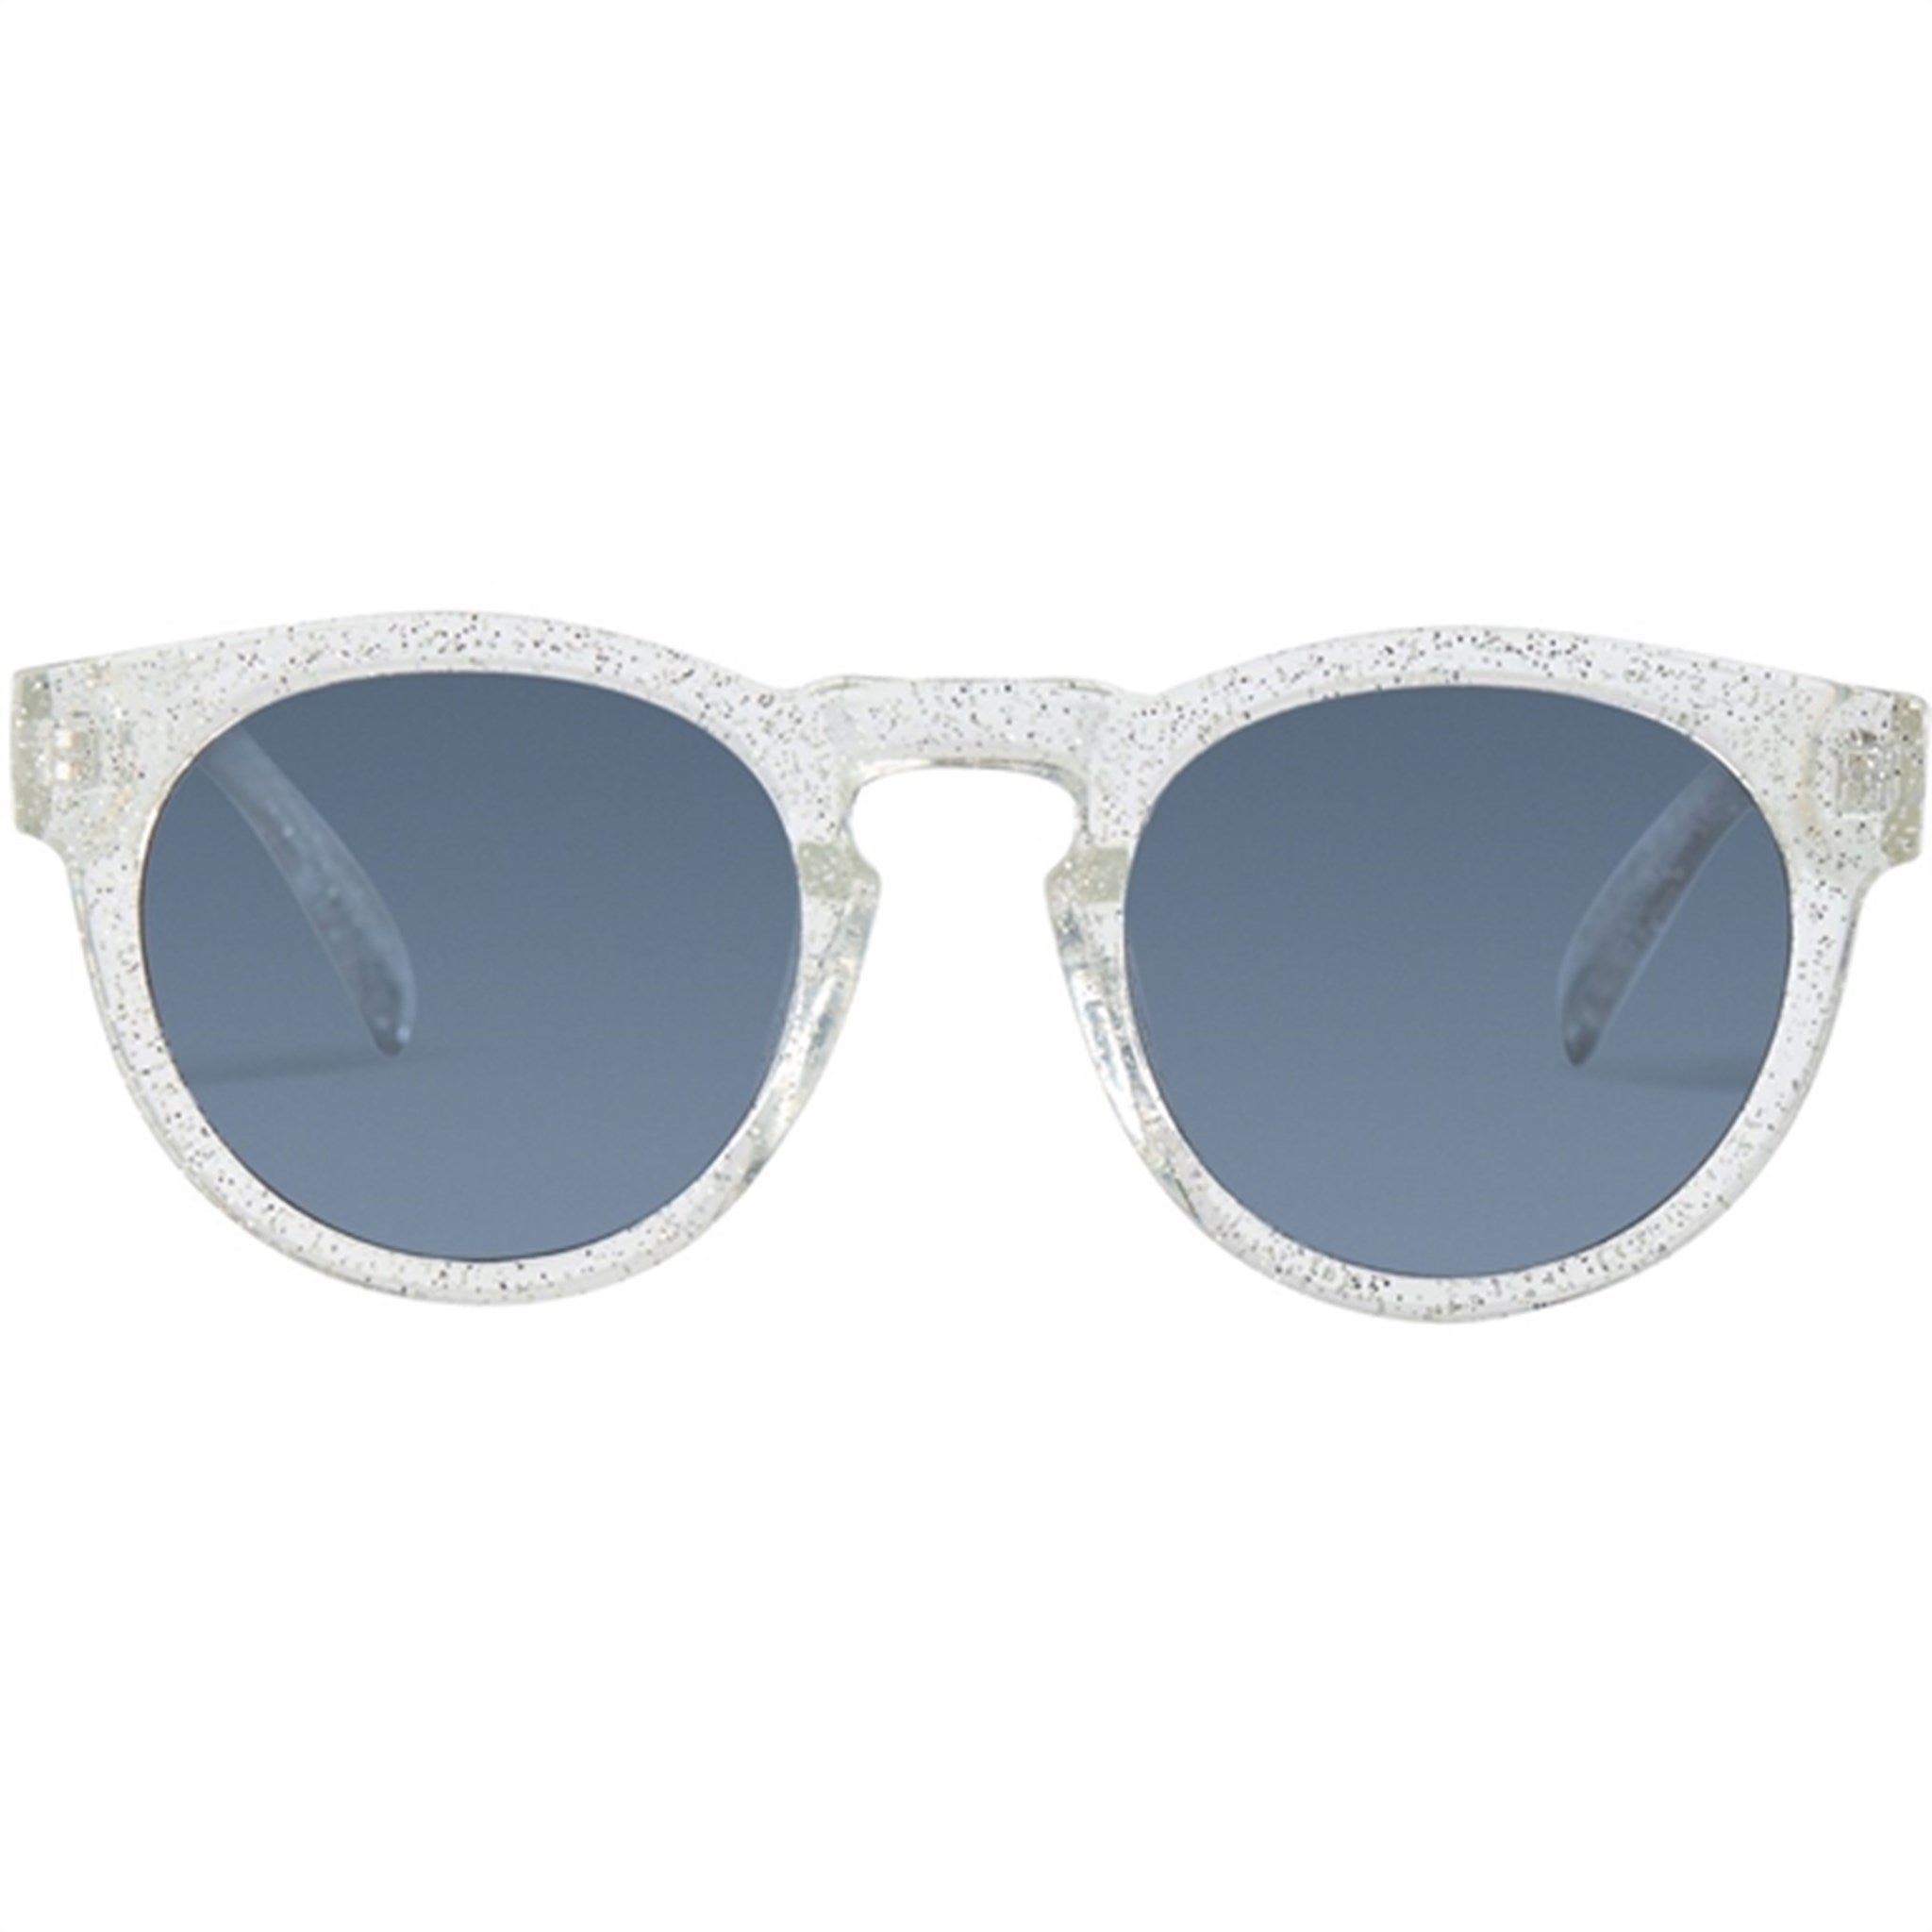 Sofie Schnoor Young Sunglasses Silver